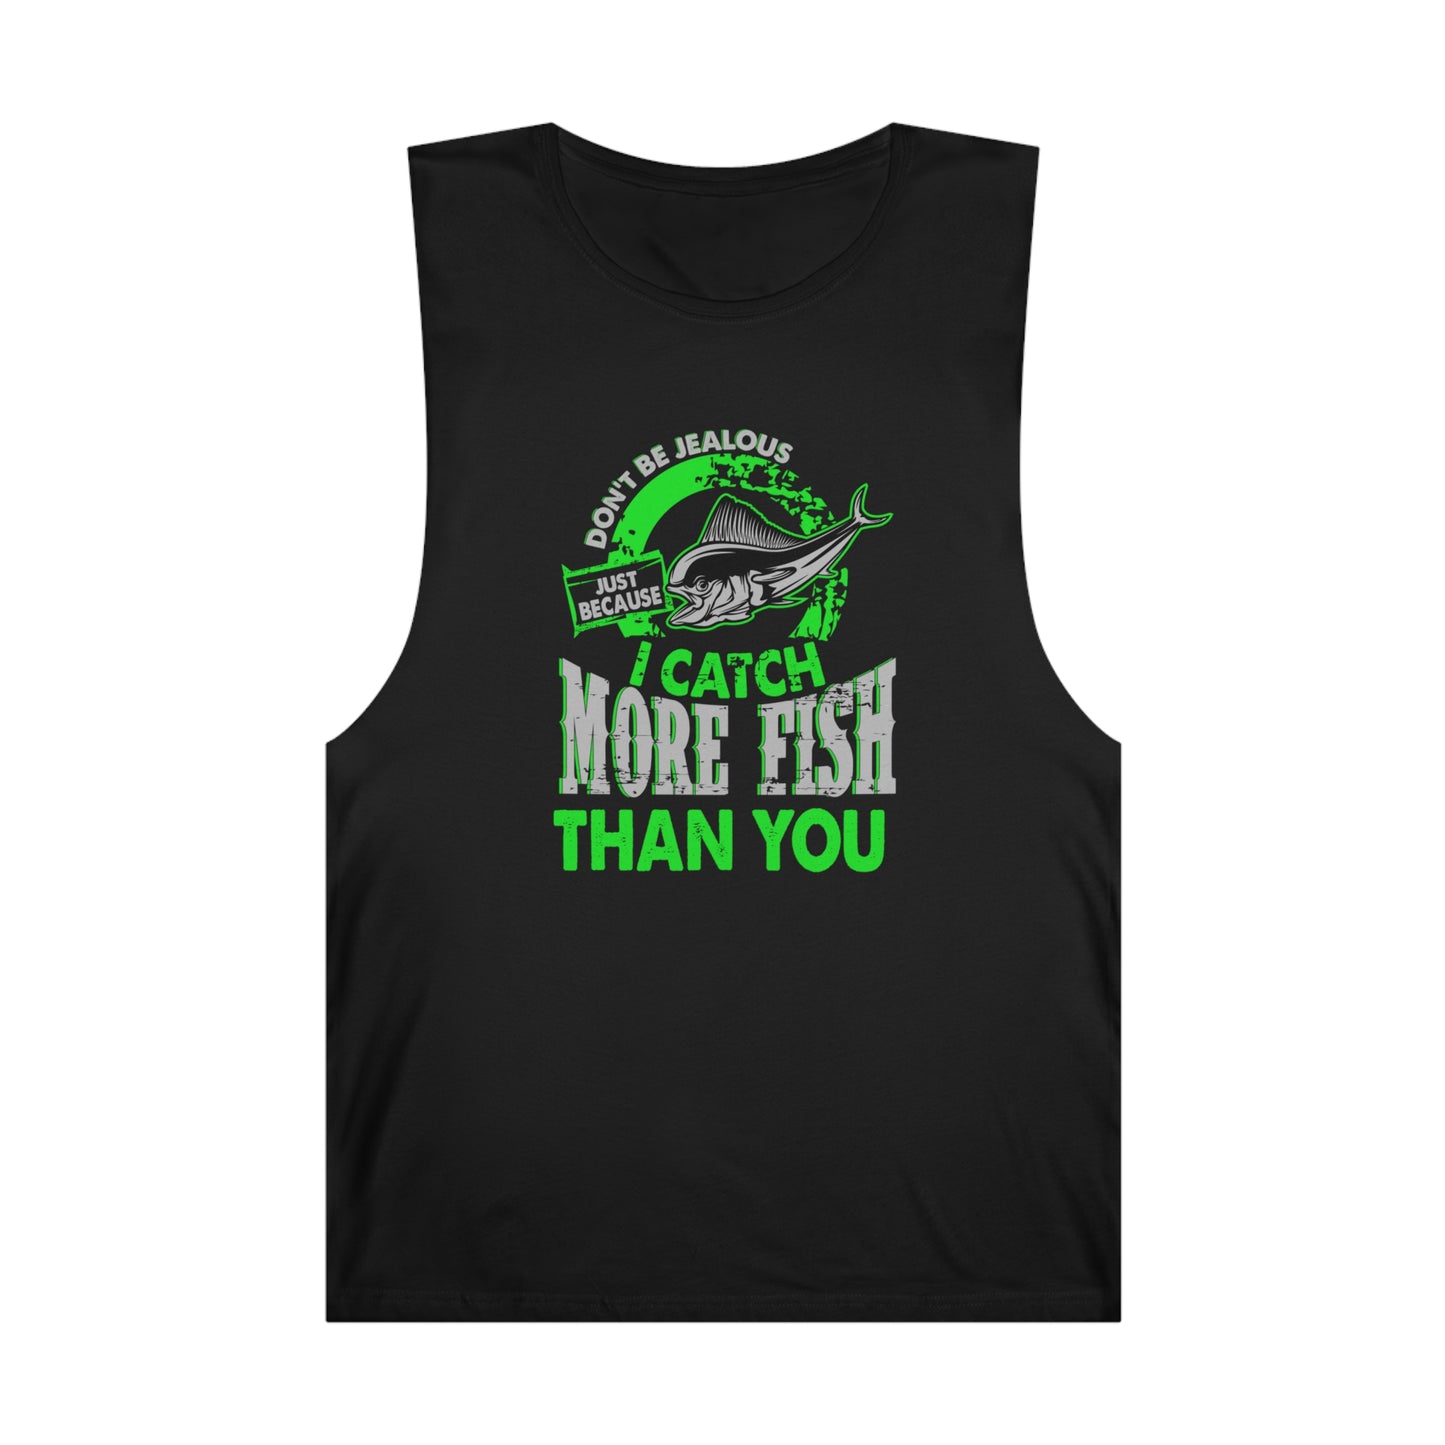 Unisex Barnard Tank - Don't Be Jealous Just Because I Catch More Fish Than You